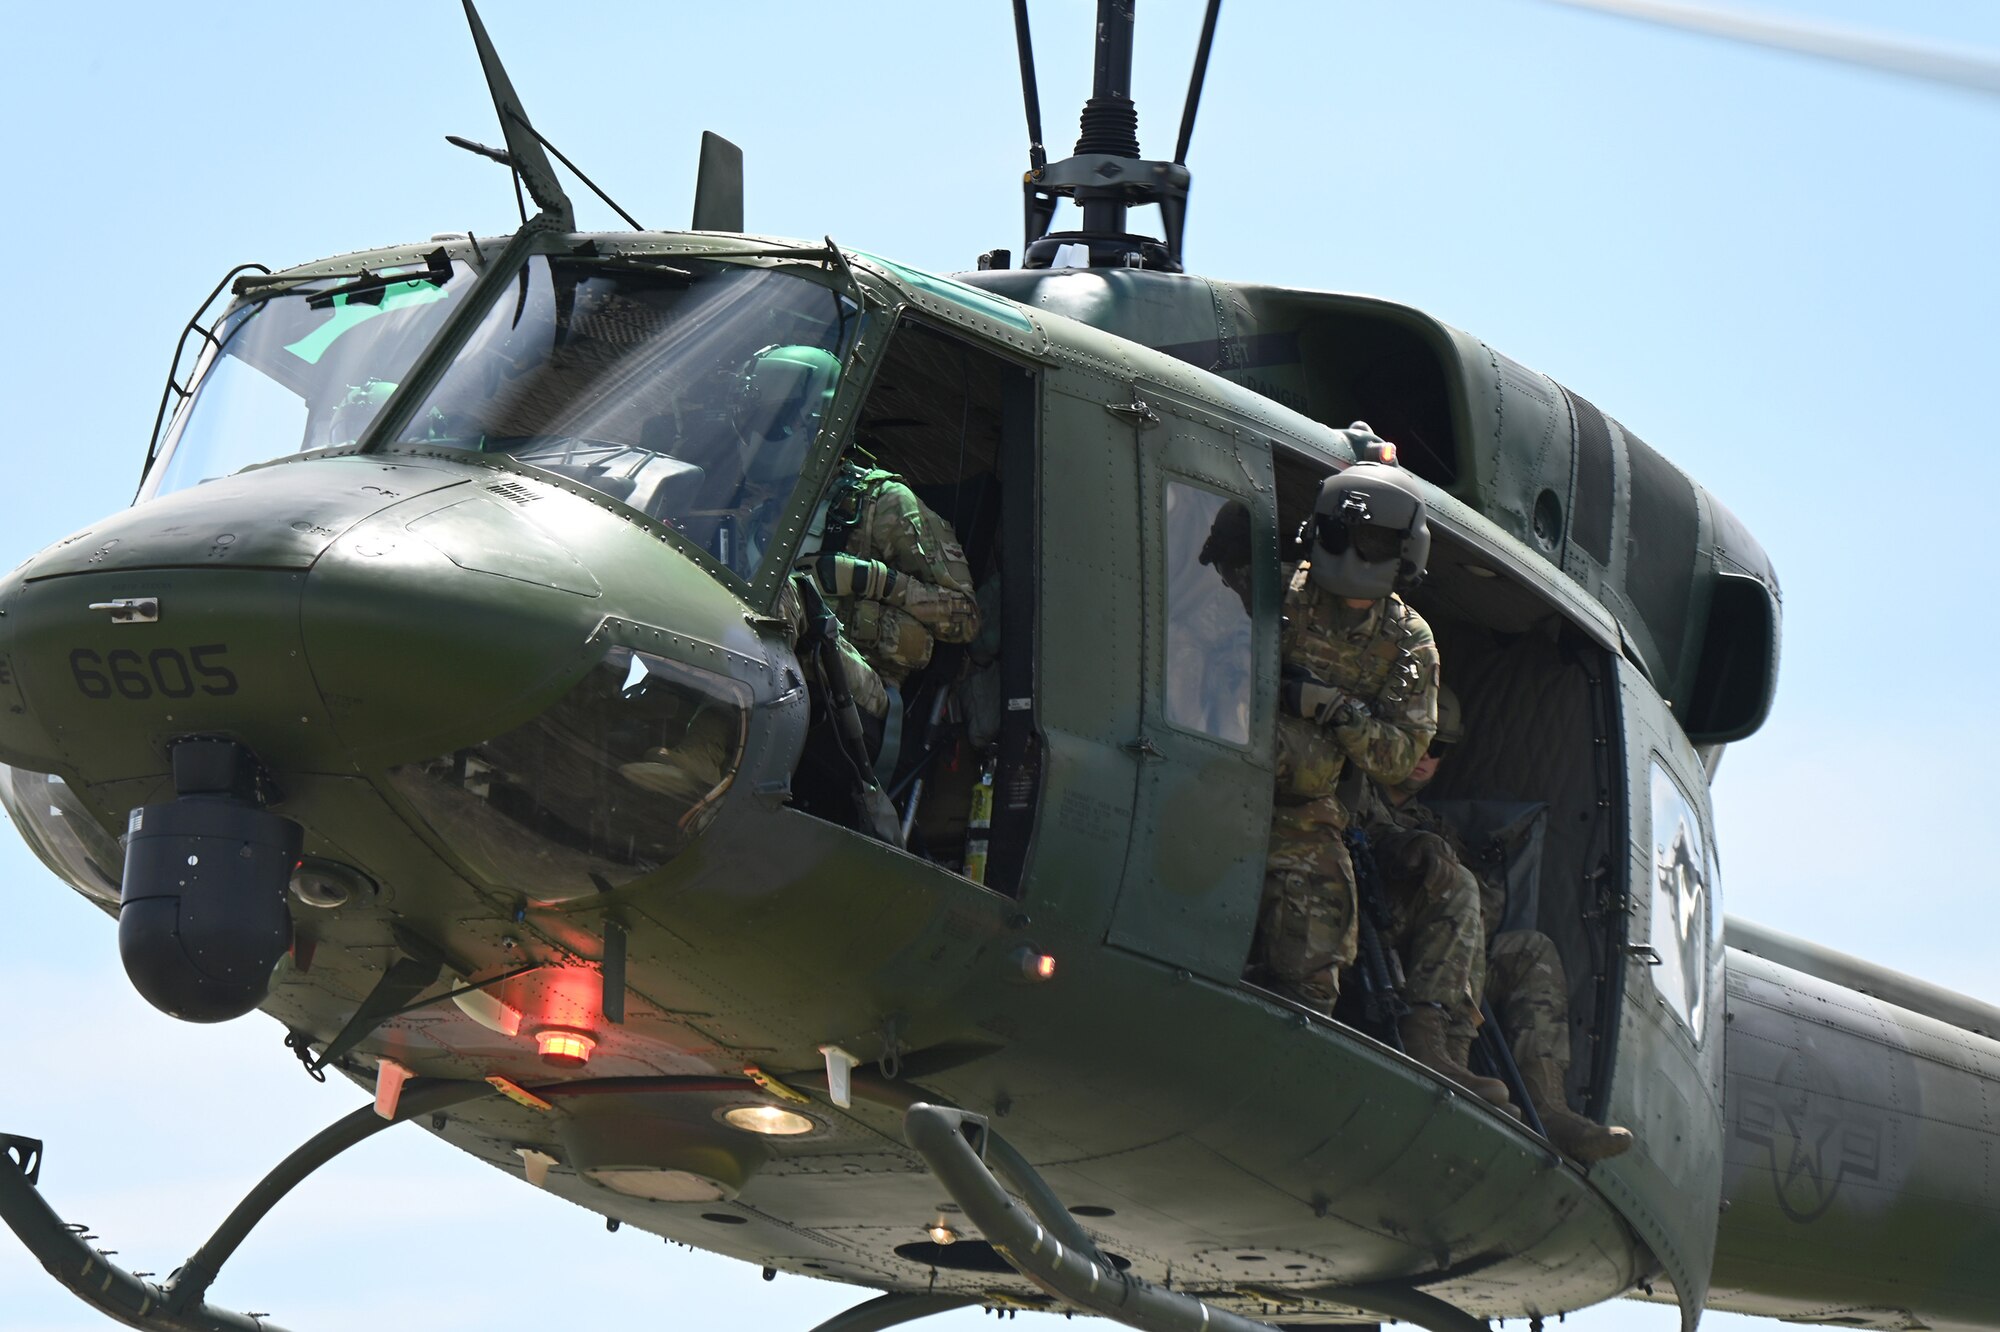 A three-person crew of a 54th Helicopter Squadron operate a UH-1N Huey helicopter as the flight engineer peers out an open door while watching the ground for landing during a training exercise at the Minot Air Force Base, N.D., June 24, 2021.